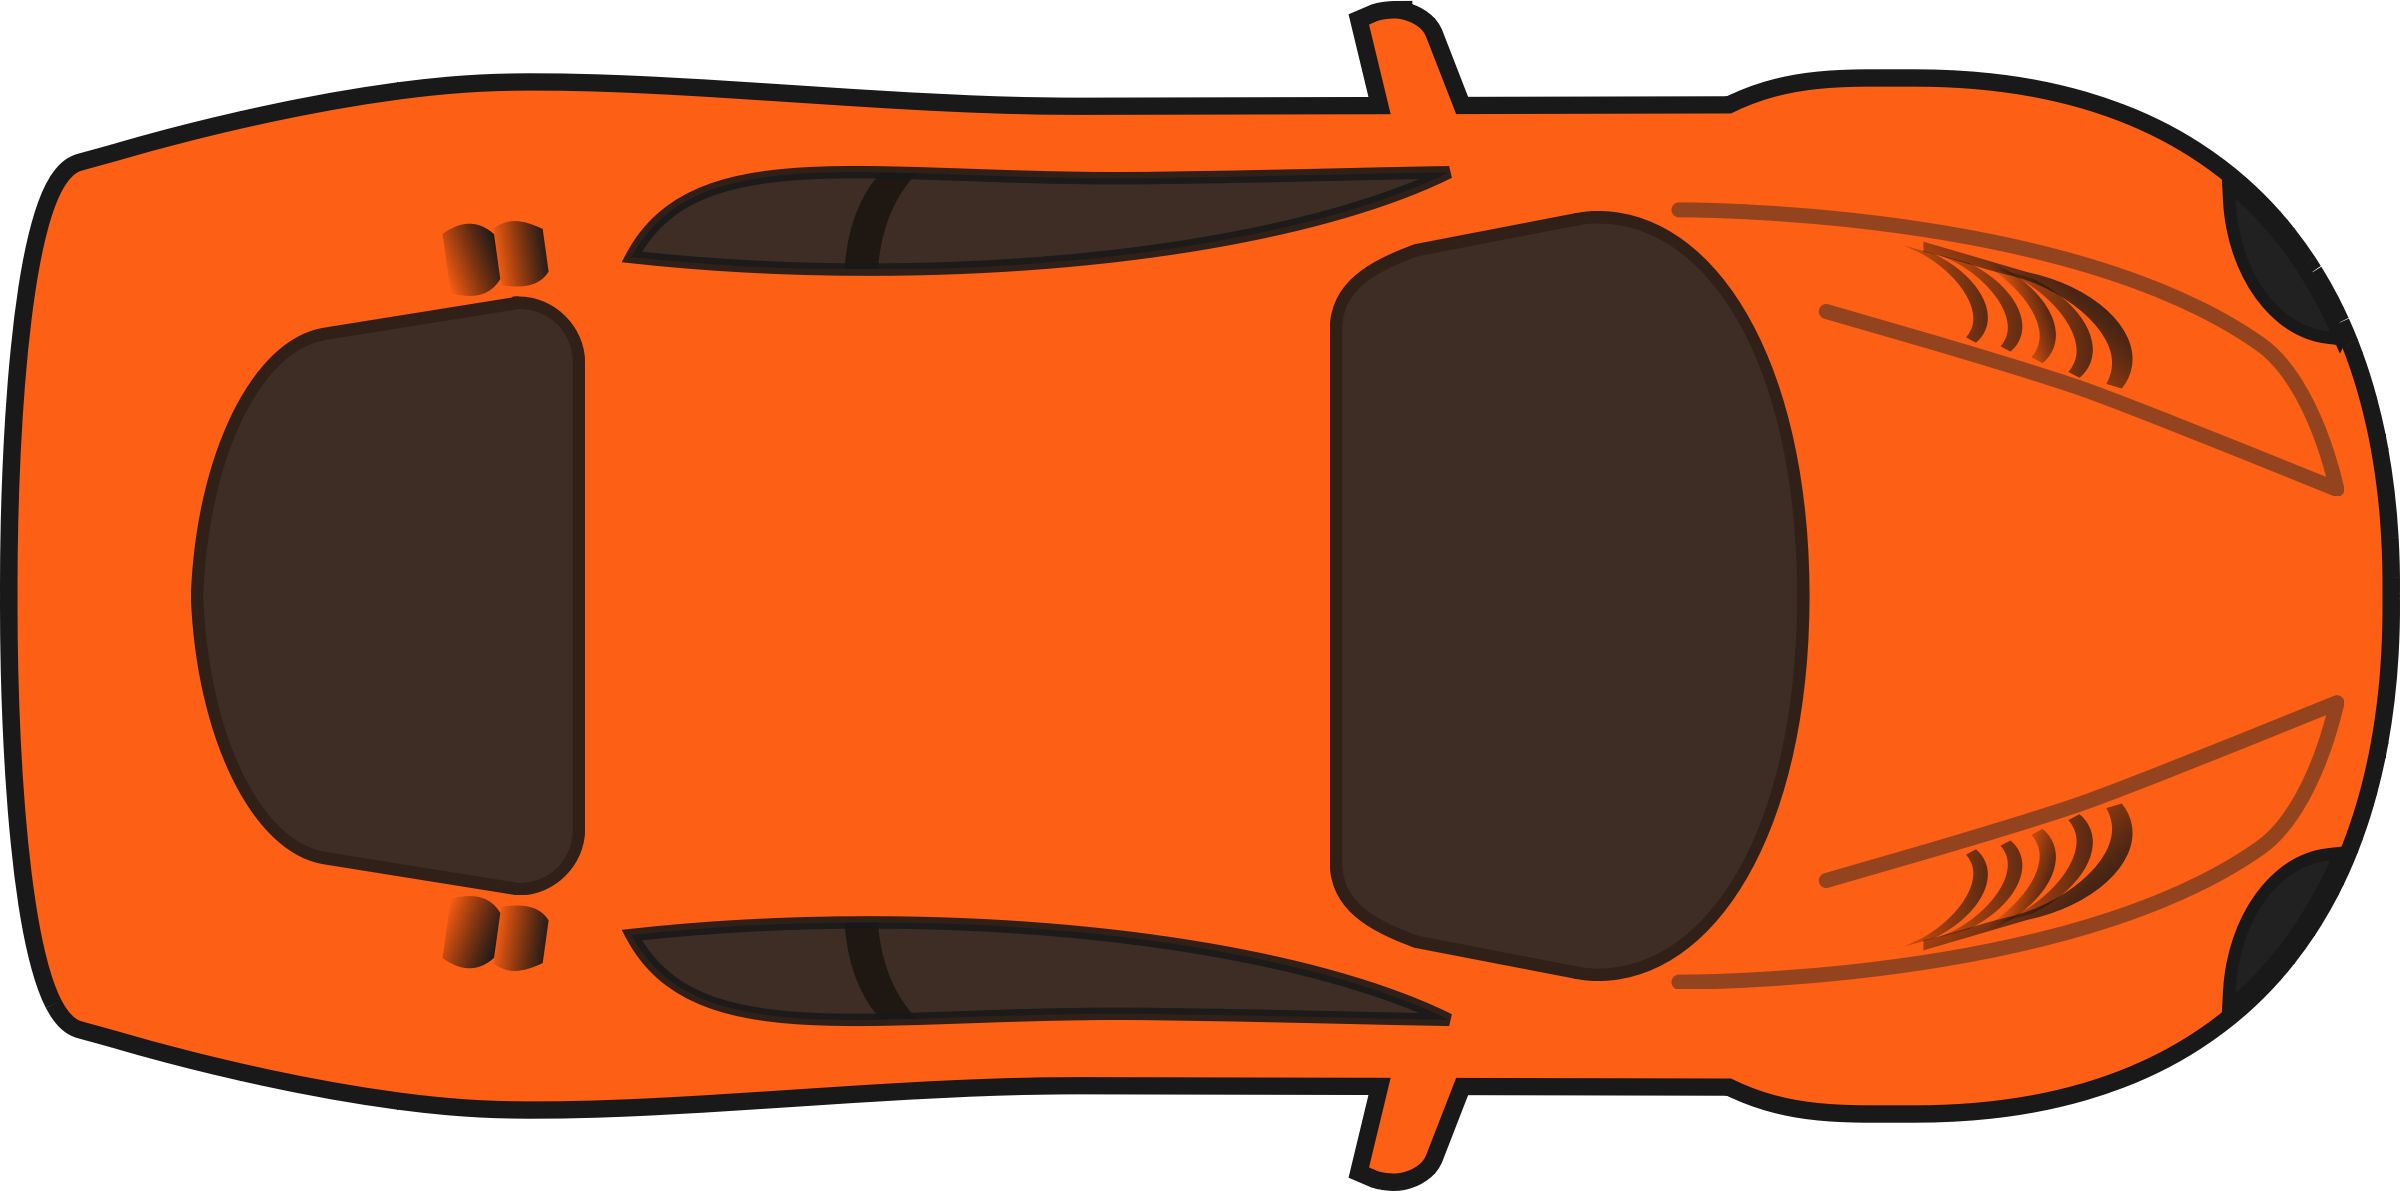 Topview of a sports car clipart 